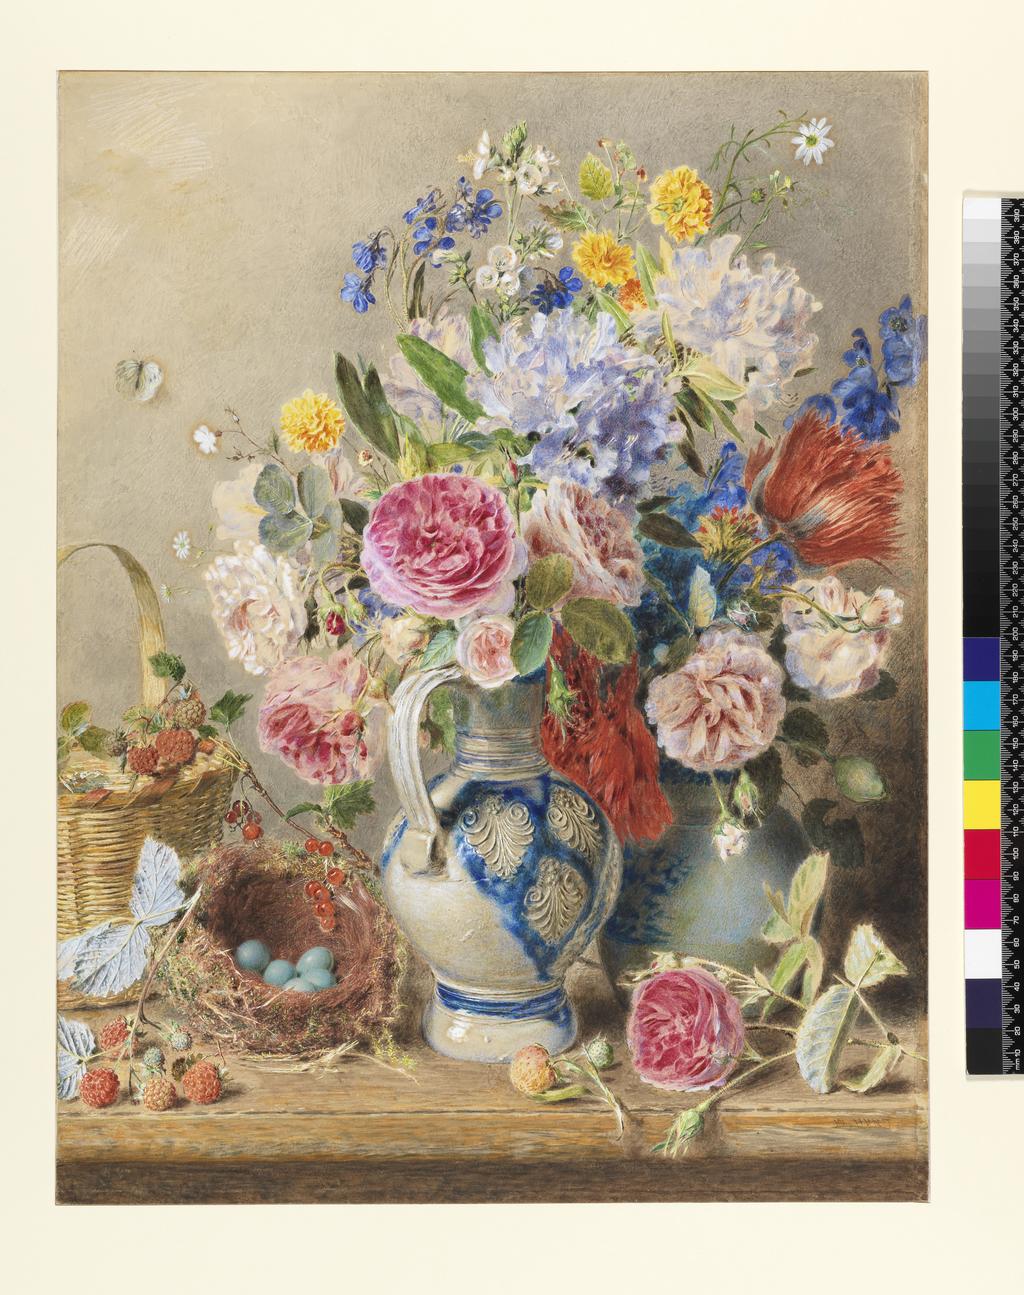 An image of Study of flowers. Hunt, William Henry (British, 1790-1864). Watercolour heightened with white, on paper, height 506 mm, width 388 mm, circa 1850.